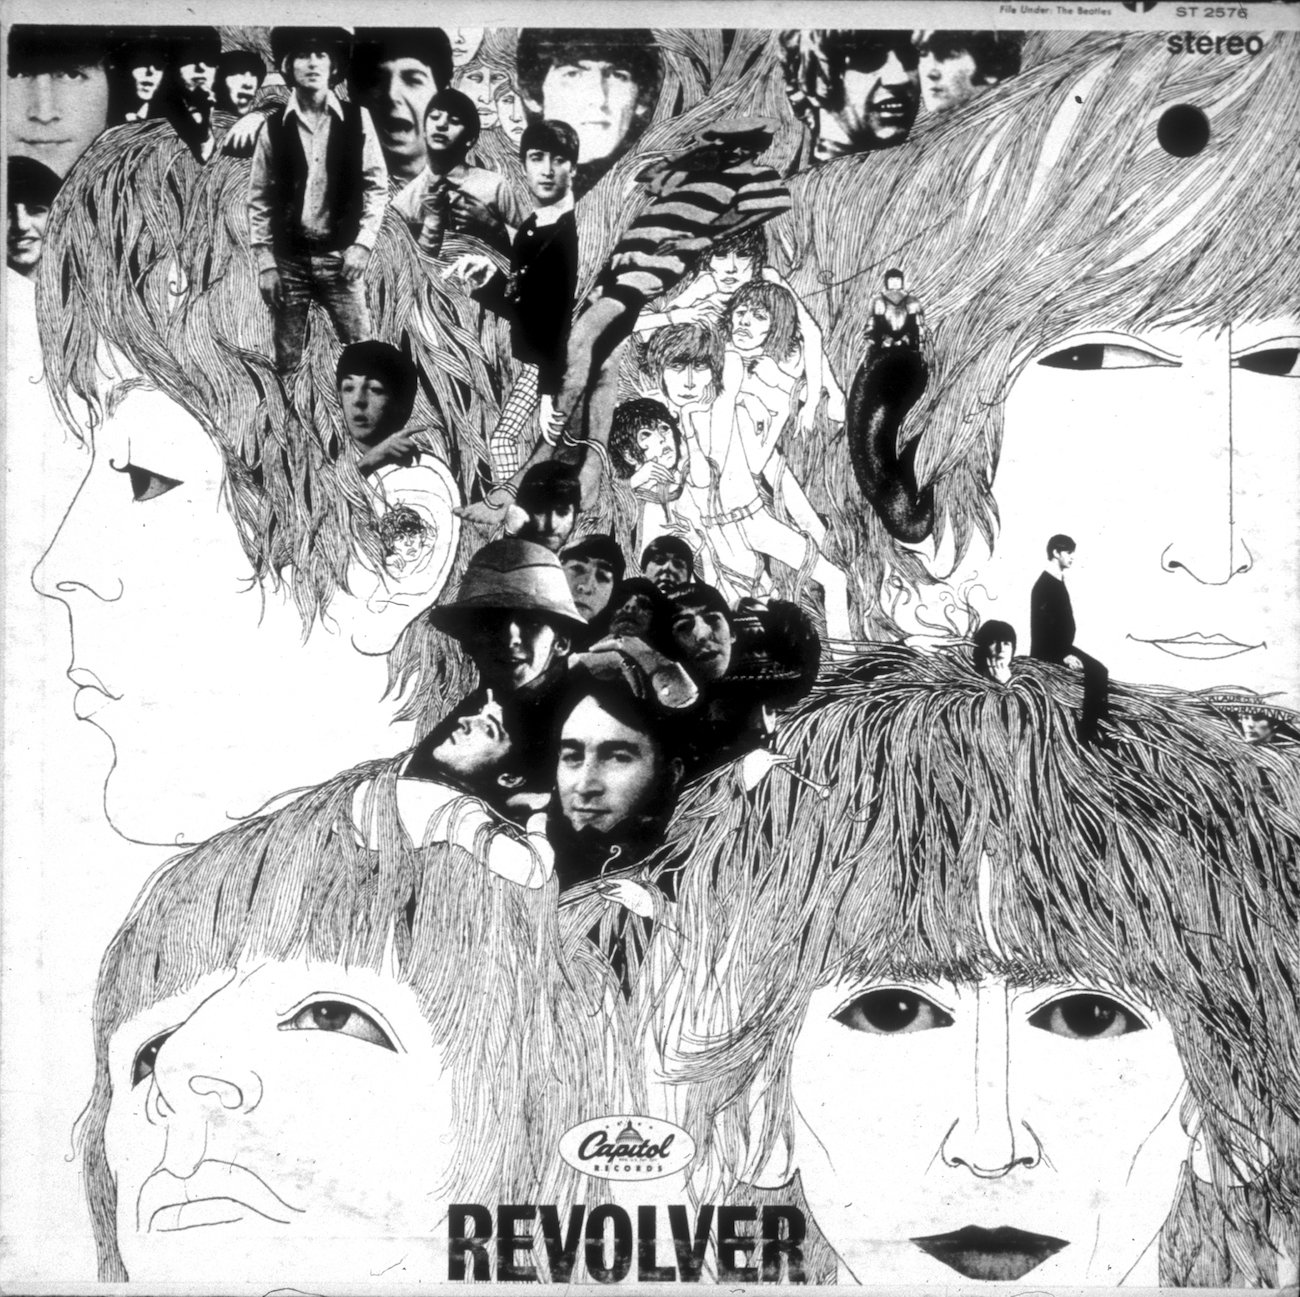 The album cover of The Beatles' 'Revolver.'